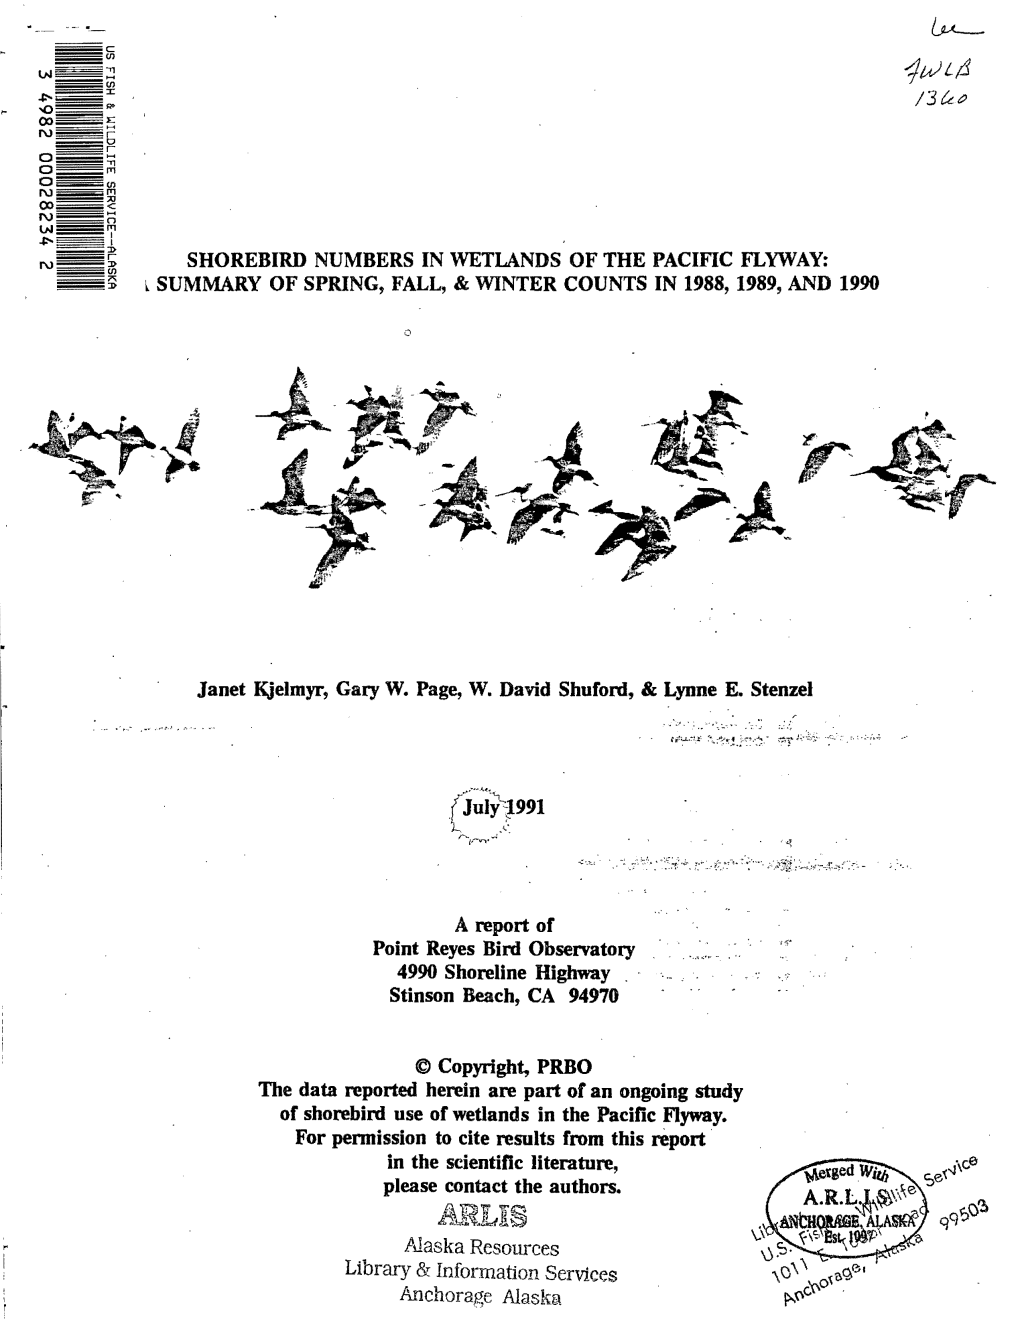 Shorebird Numbers in Wetlands of the Pacific Flyway: ~ Summary of Spring, Fall, & Winter Counts in 1988, 1989, and 1990